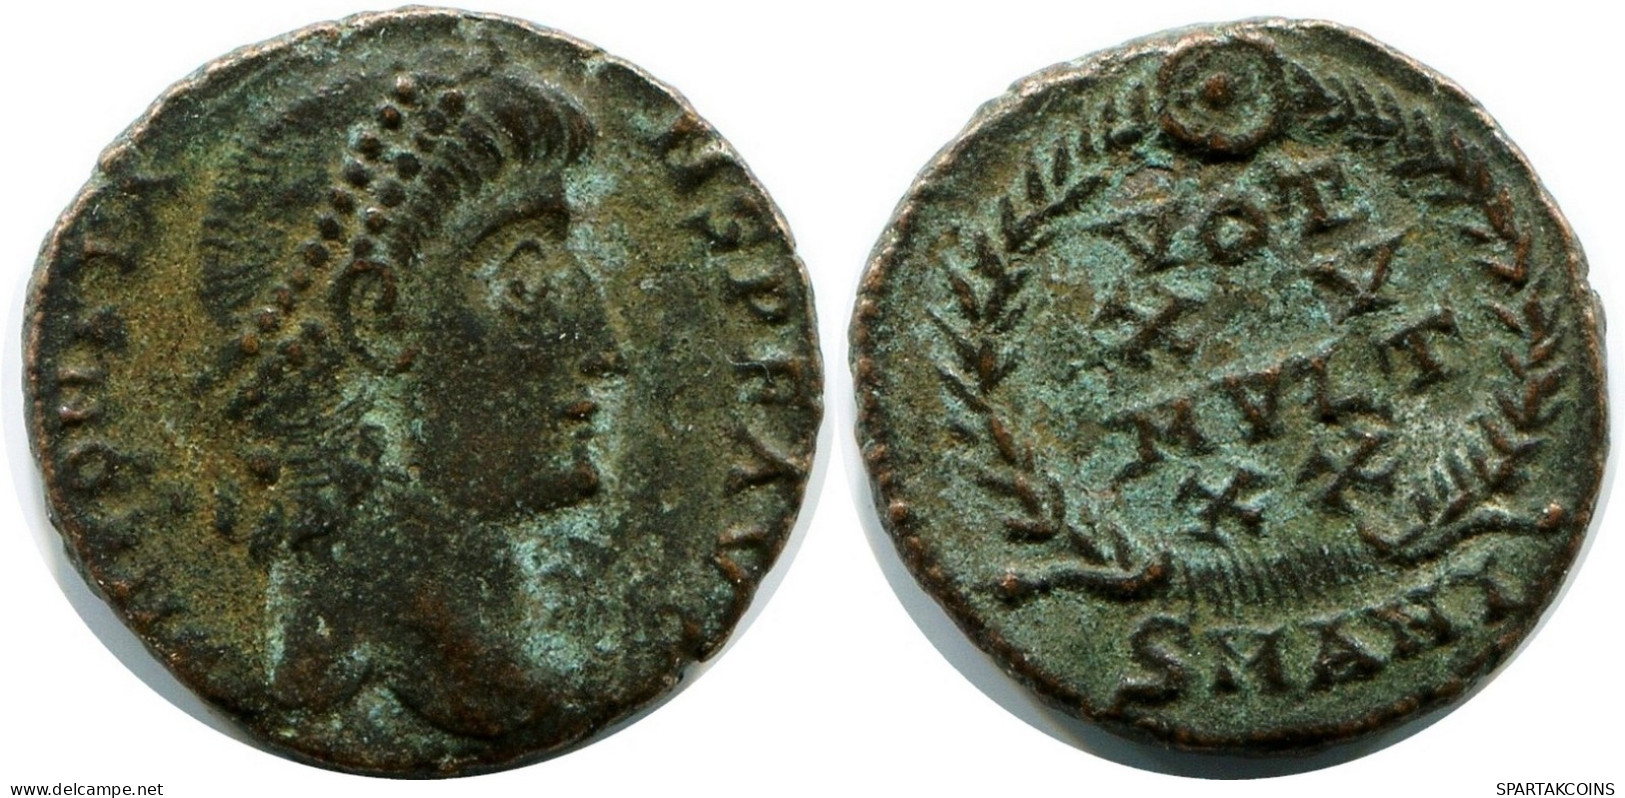 CONSTANS MINTED IN ANTIOCH FROM THE ROYAL ONTARIO MUSEUM #ANC11823.14.U.A - The Christian Empire (307 AD To 363 AD)